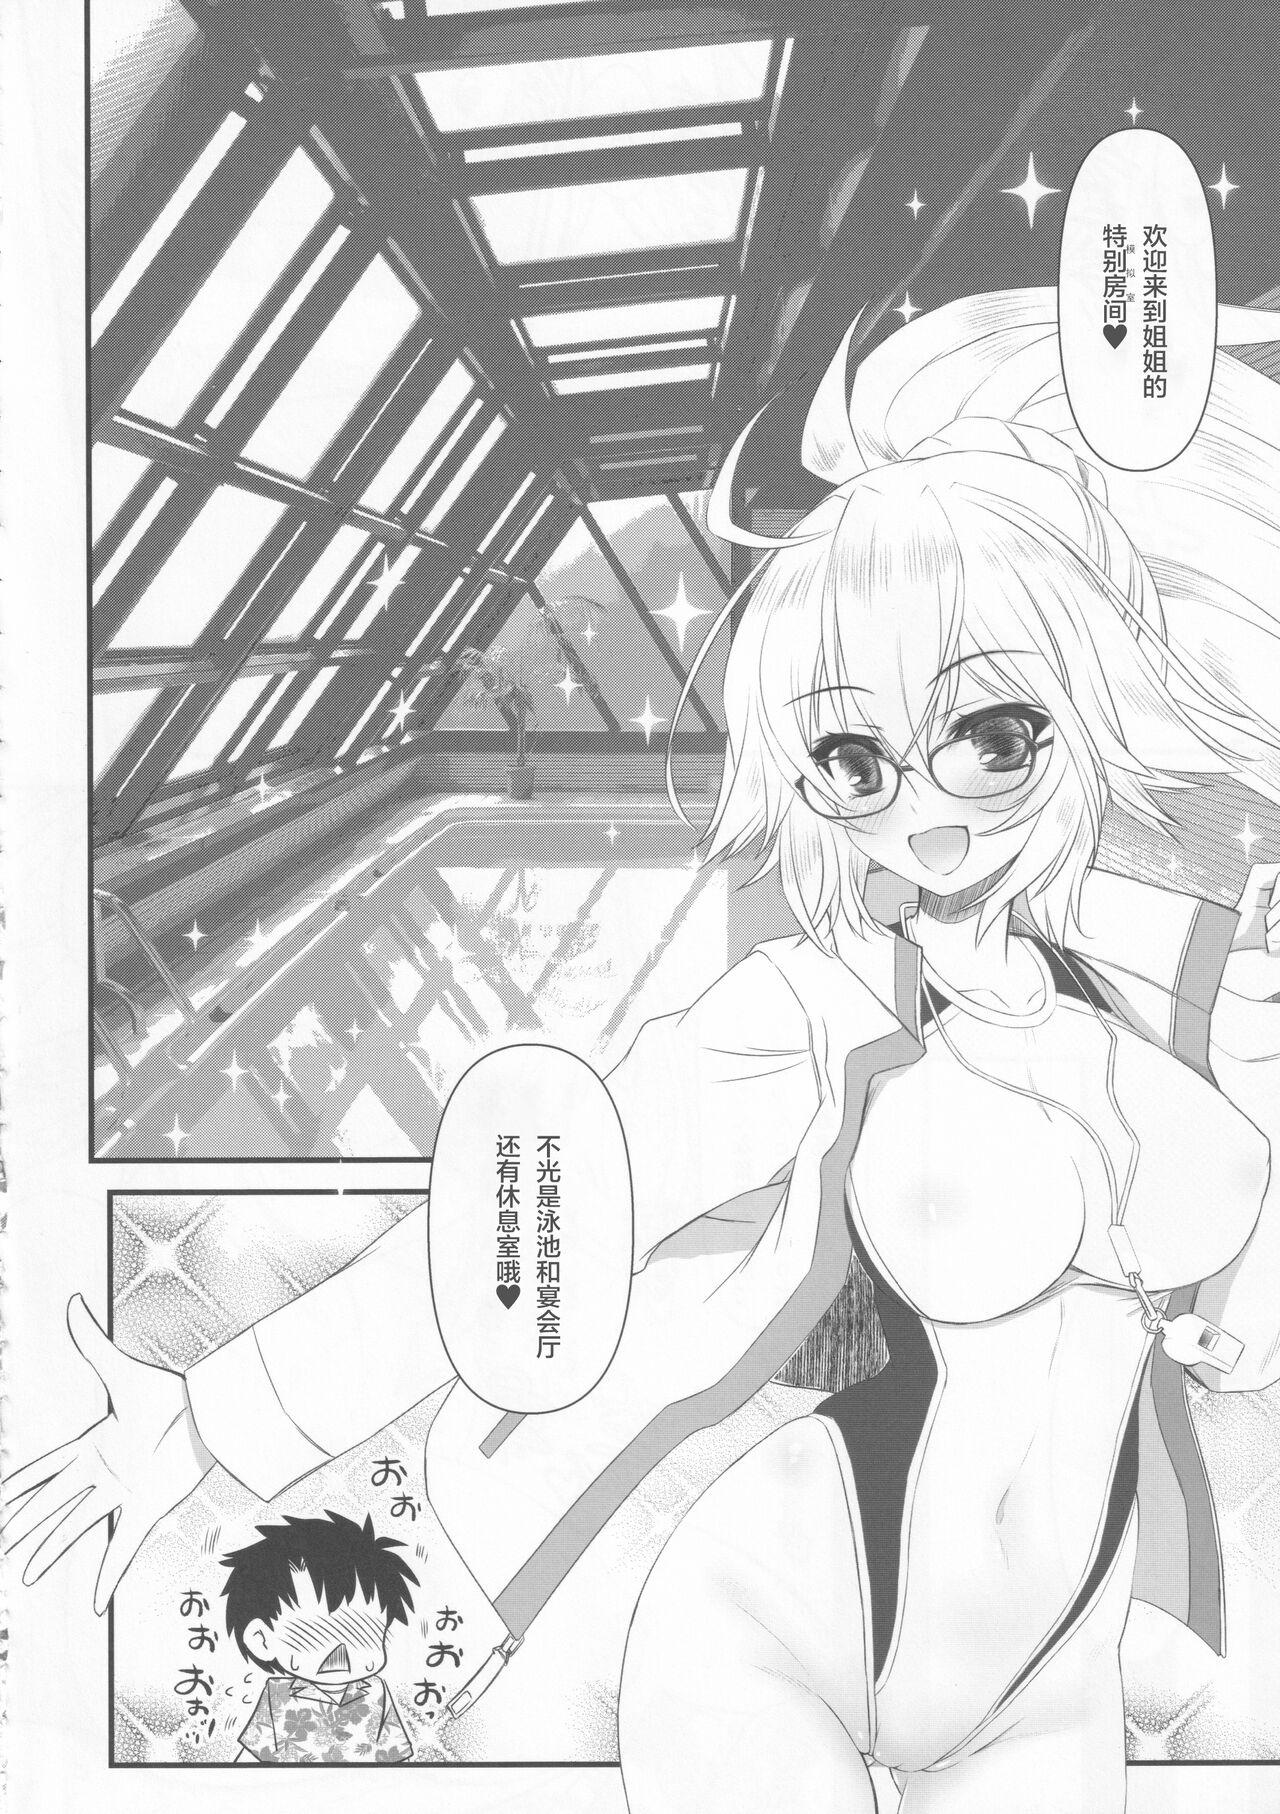 Couch Megane Kyouei Mizugi Onee-chan Returns - Fate grand order Gets - Page 5